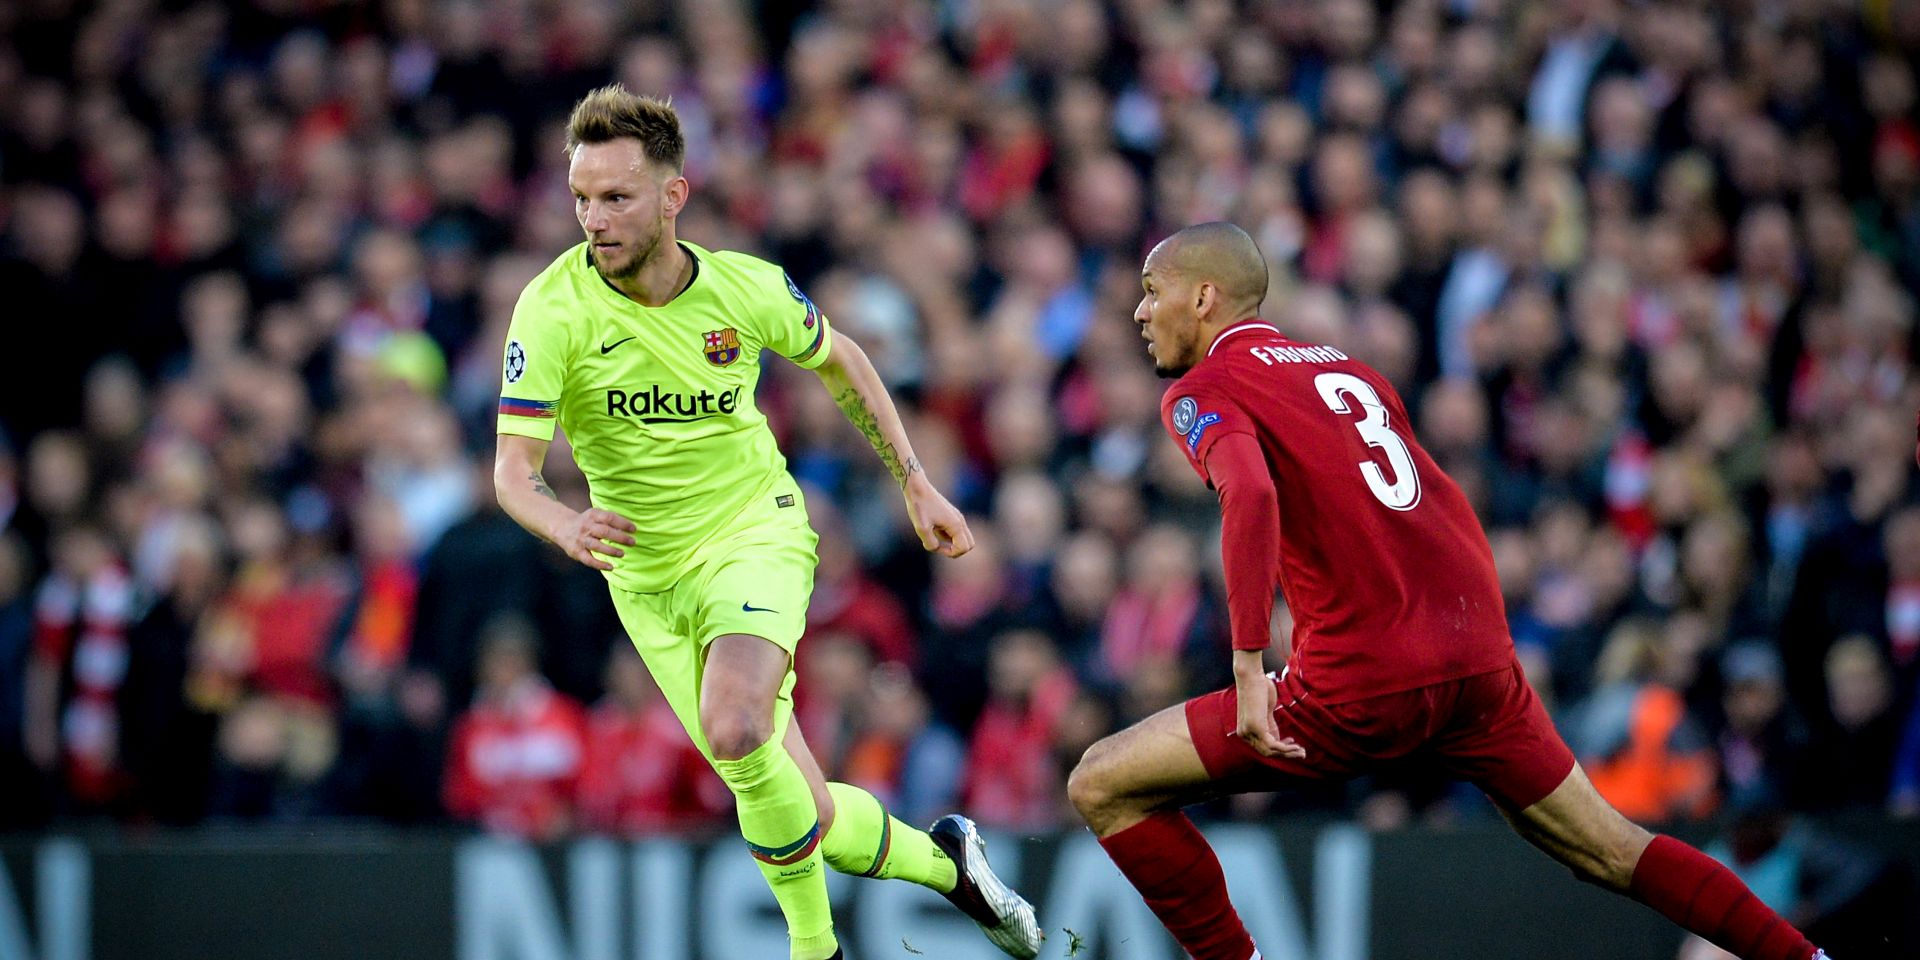 epa07554501 Barcelona's Ivan Rakitic (L) in action against Liverpool's Fabinho (R) during the UEFA Champions League semi final second leg soccer match between Liverpool FC and FC Barcelona at Anfield stadium in Liverpool, Britain, 07 May 2019.  EPA/PETER POWELL